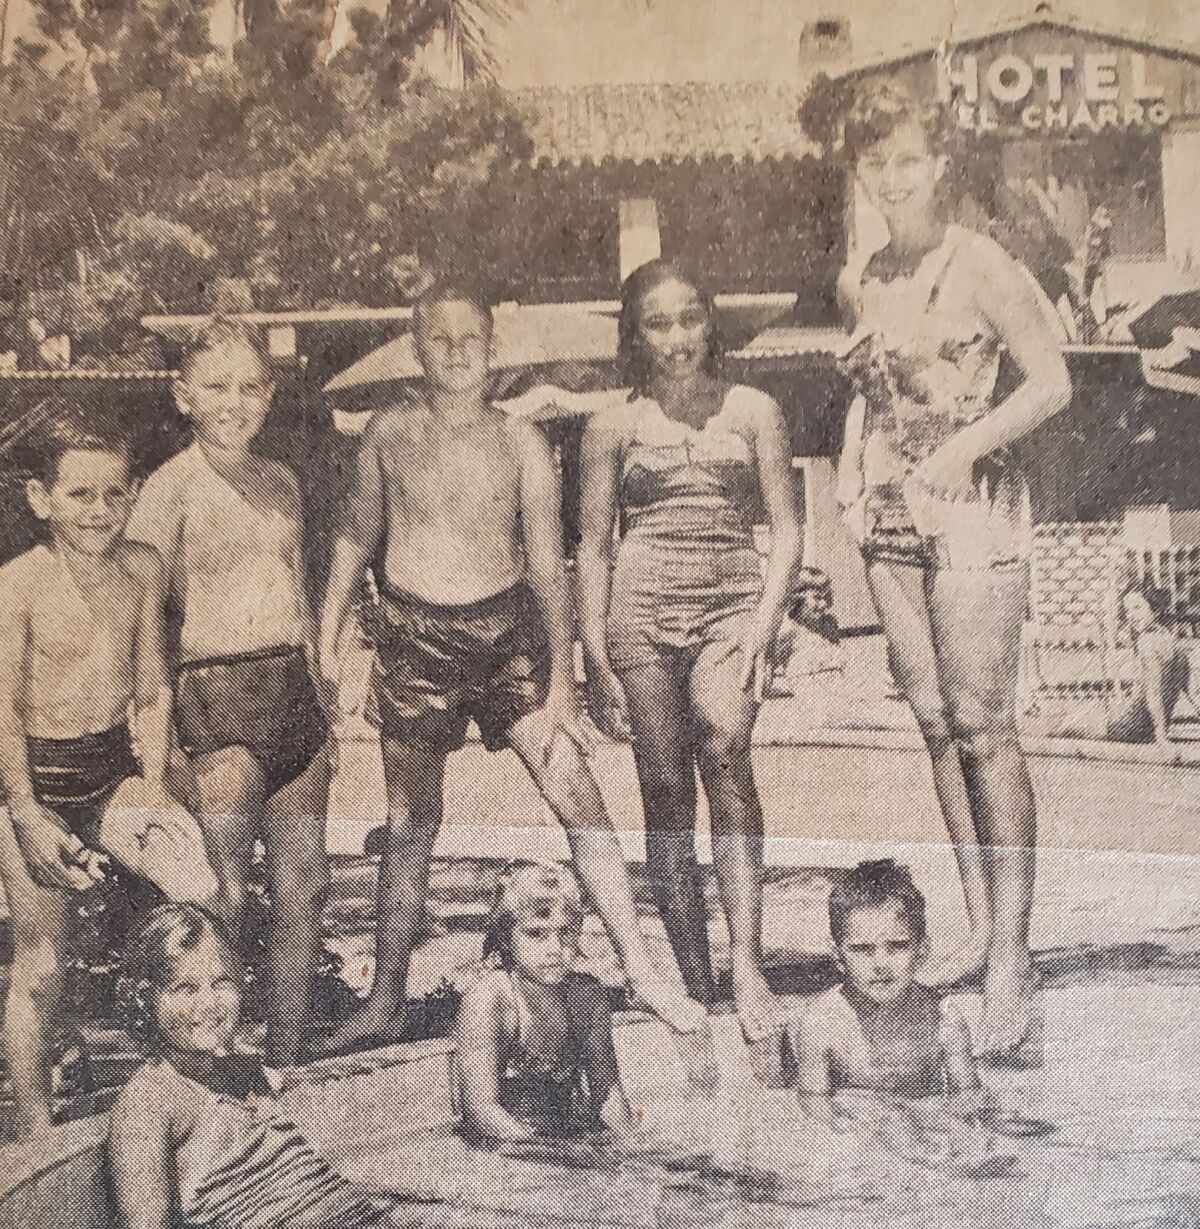 Harry Cummins, standing second from left, hangs out at the Hotel del Charro in La Jolla in his youth.